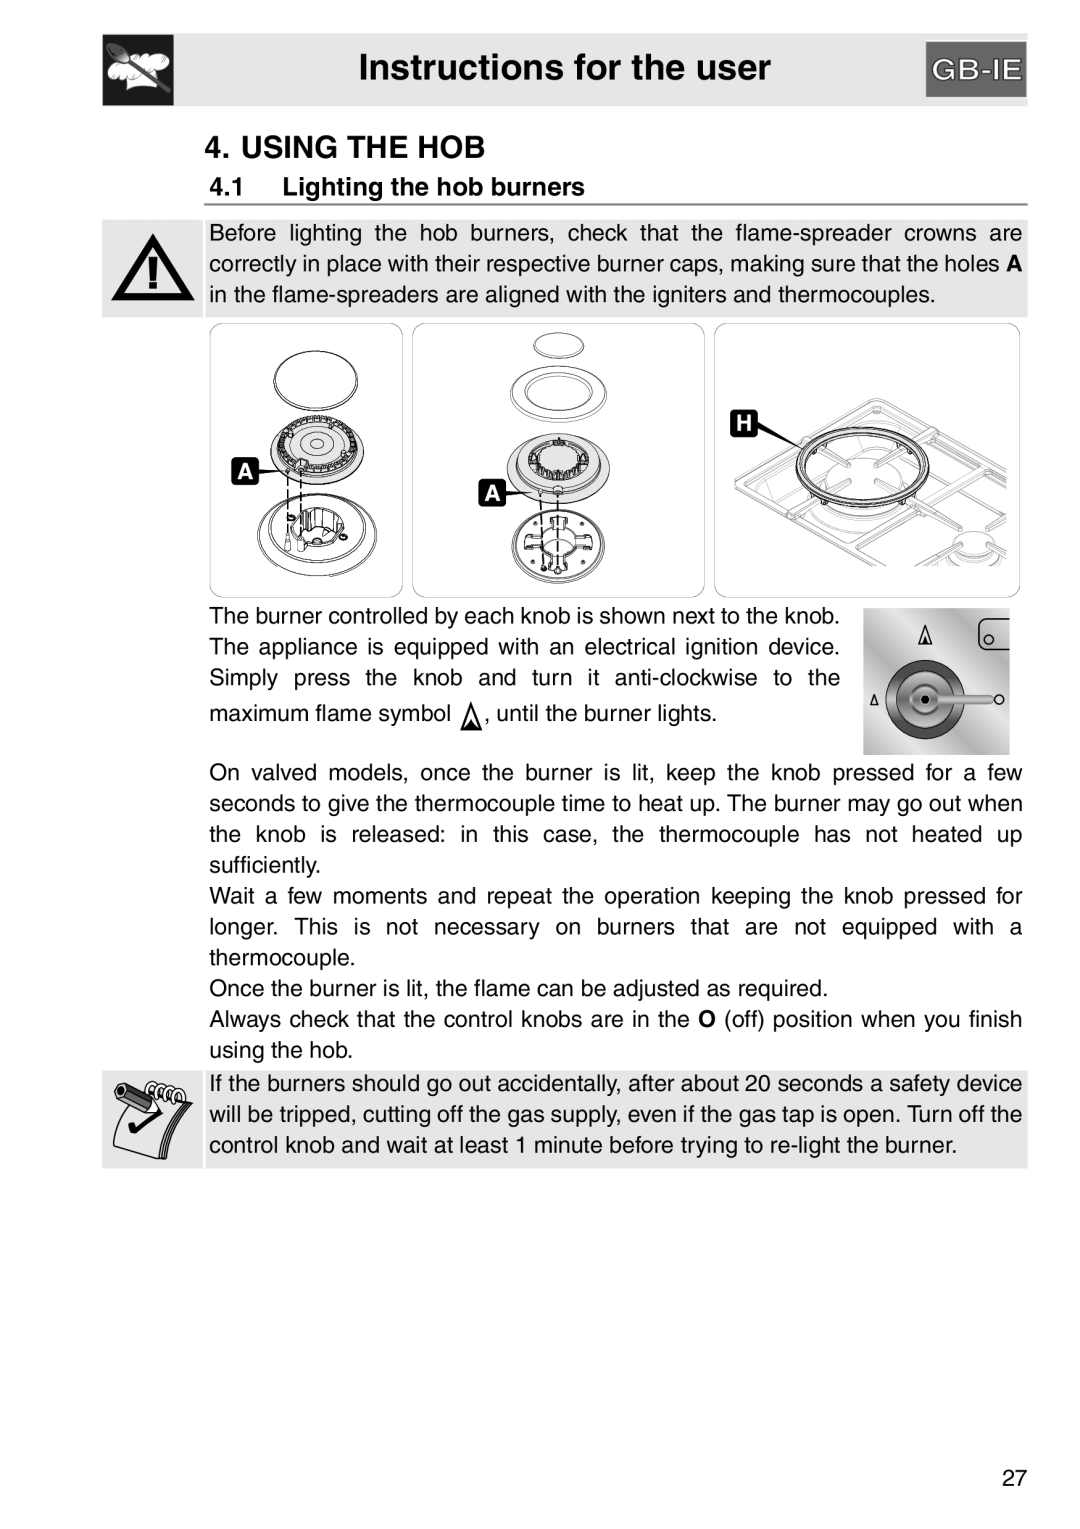 Smeg PGA64, gas cooktop manual Instructions for the user, Using The Hob, 4.1Lighting the hob burners, H A A 